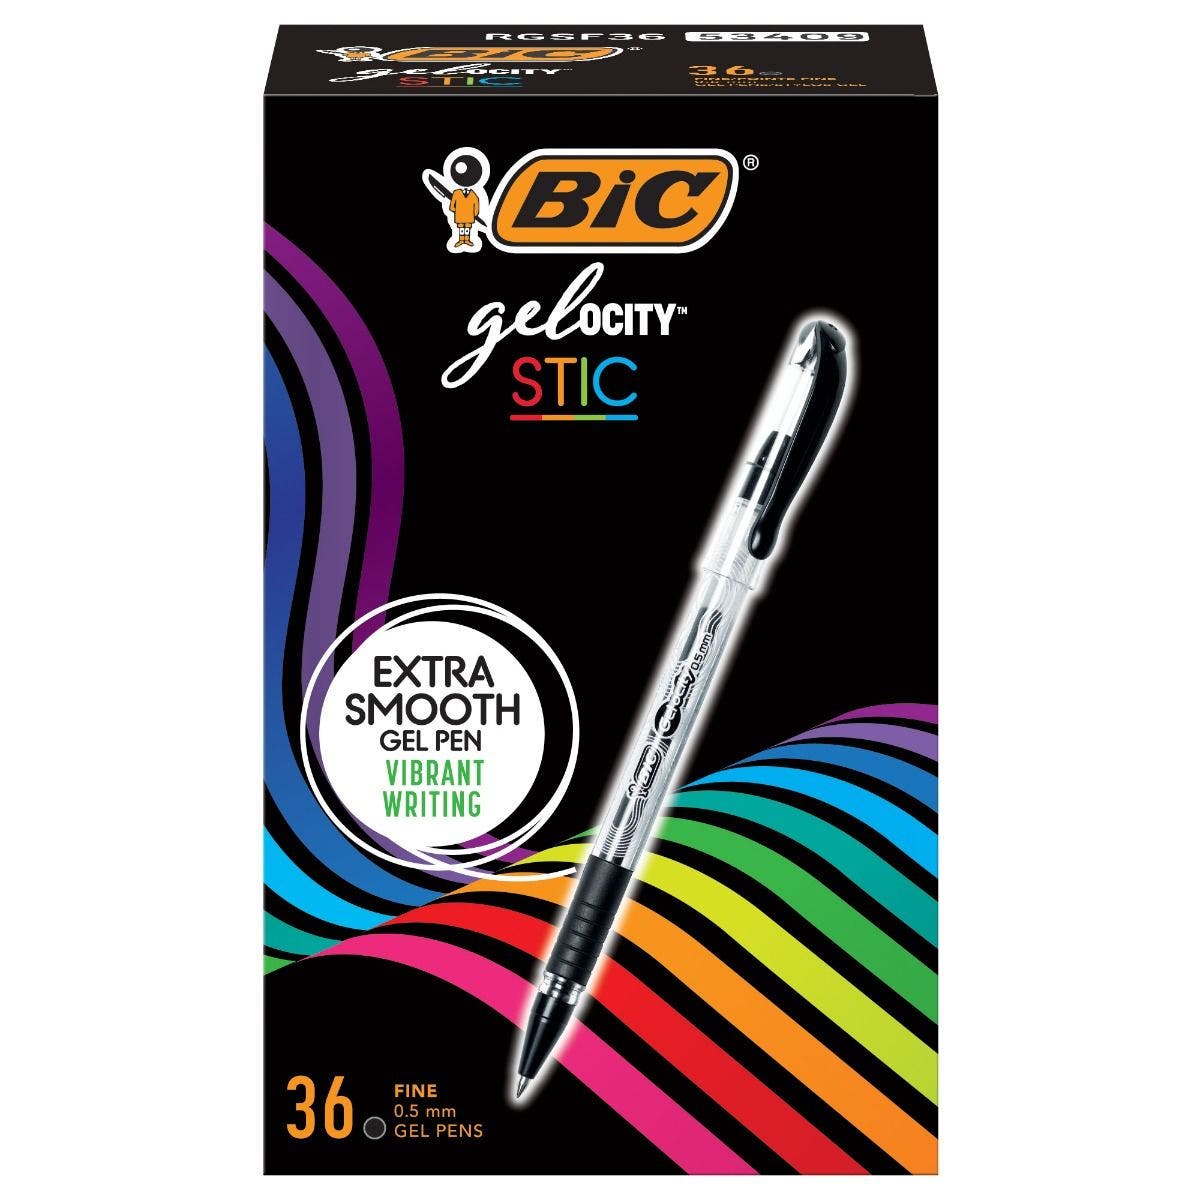 Continent Hoes Laster BIC Gelocity Smooth Gel Pens, Fine Point (0.5mm), Black, 36-Count Pack